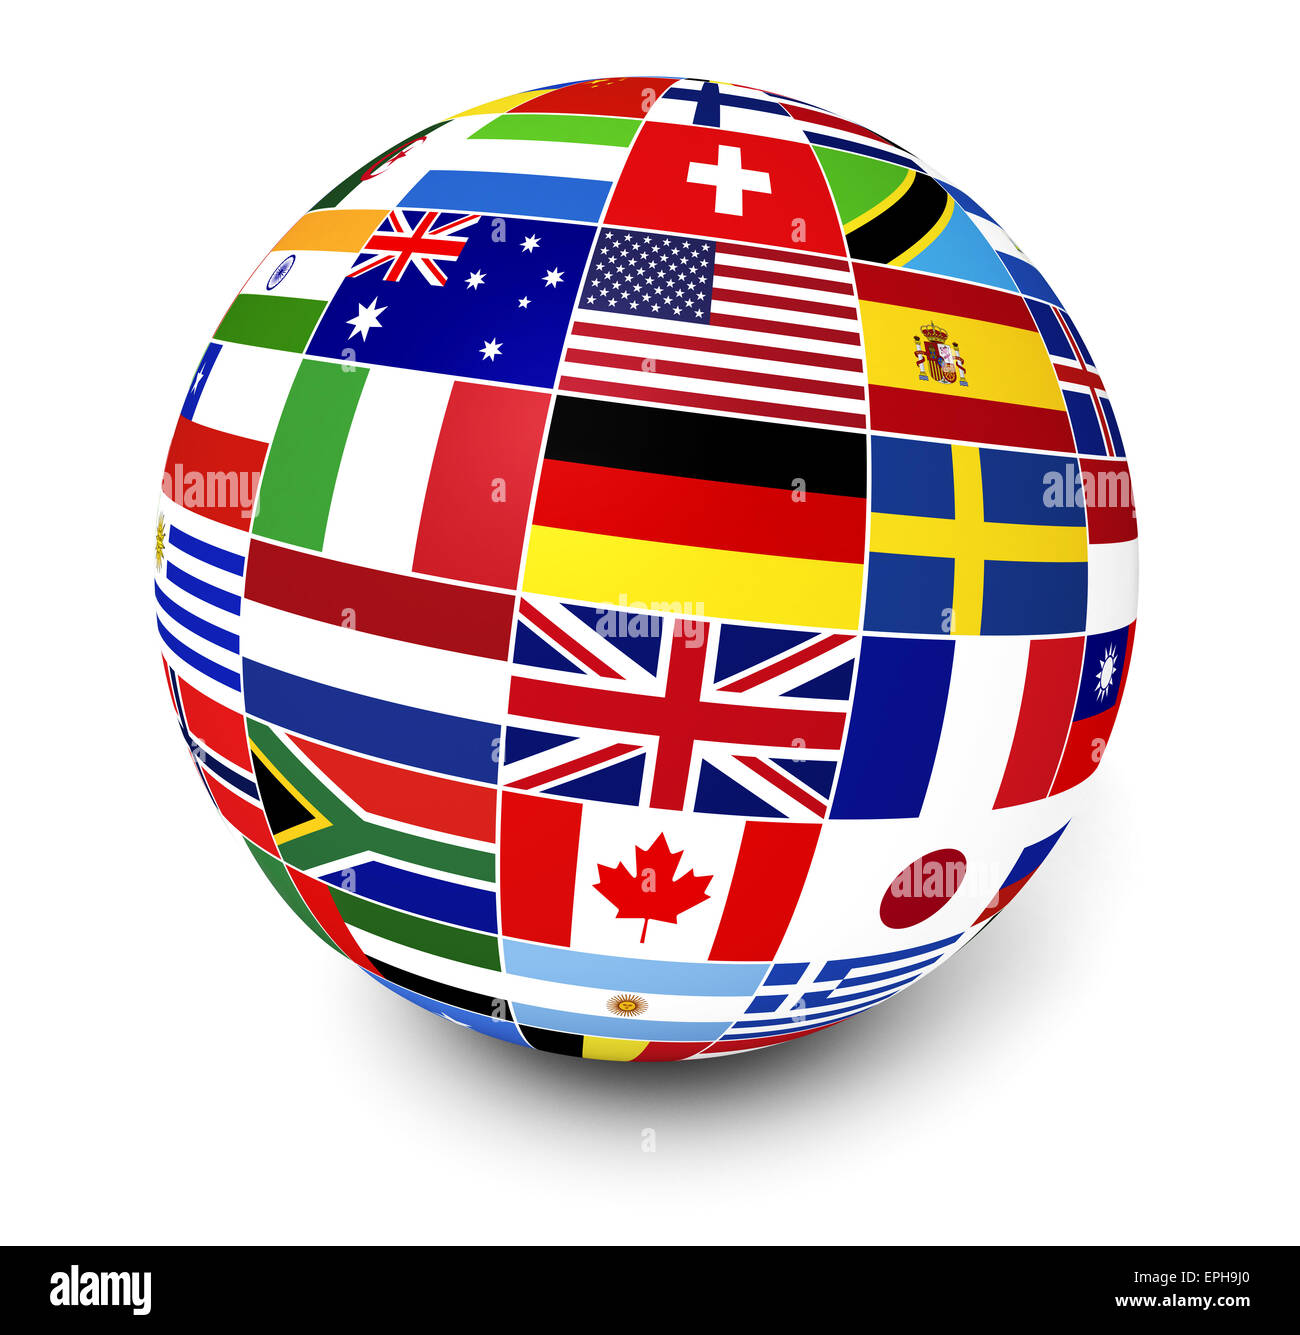 Travel, services and international business management concept with a globe and international flags of the world. Stock Photo